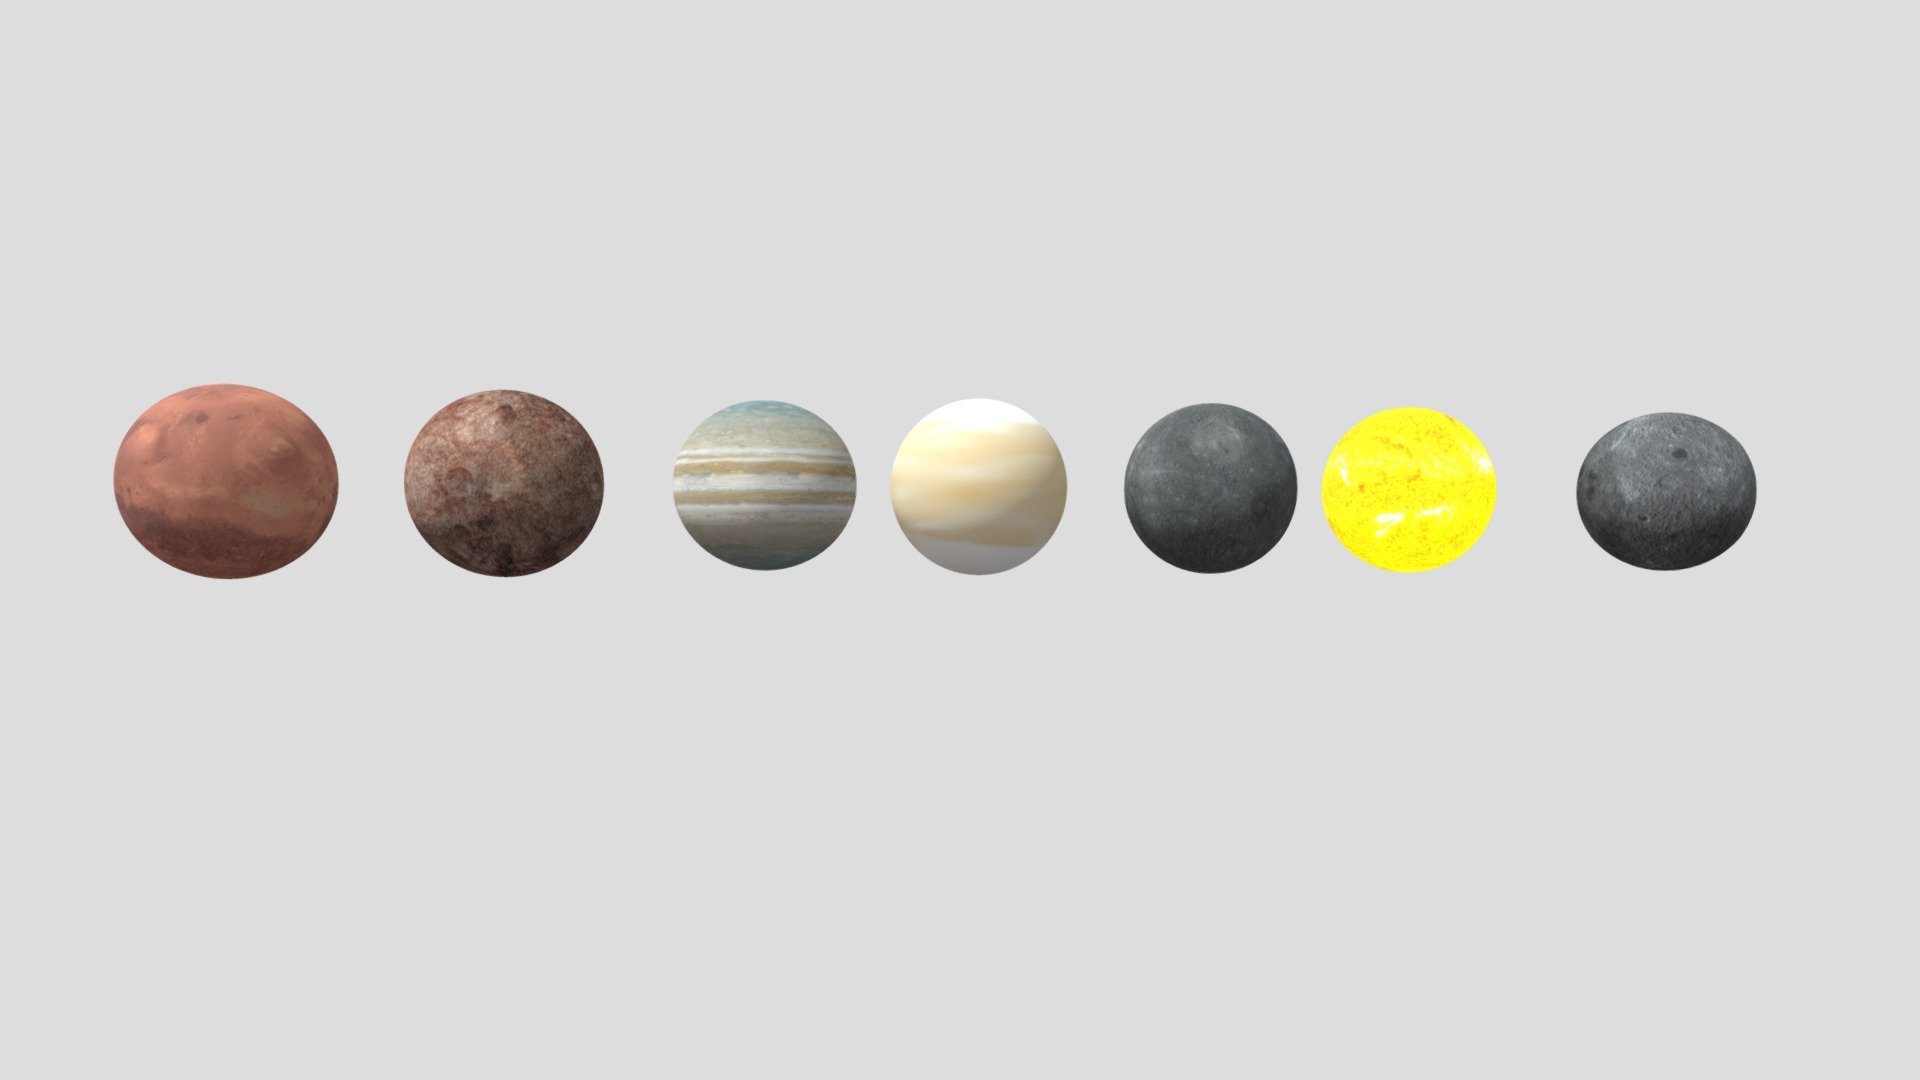 solar system
NASA
space
starry sky
Earth
sun - Solar system - Buy Royalty Free 3D model by Jackey&Design (@1394725324zhang) 3d model